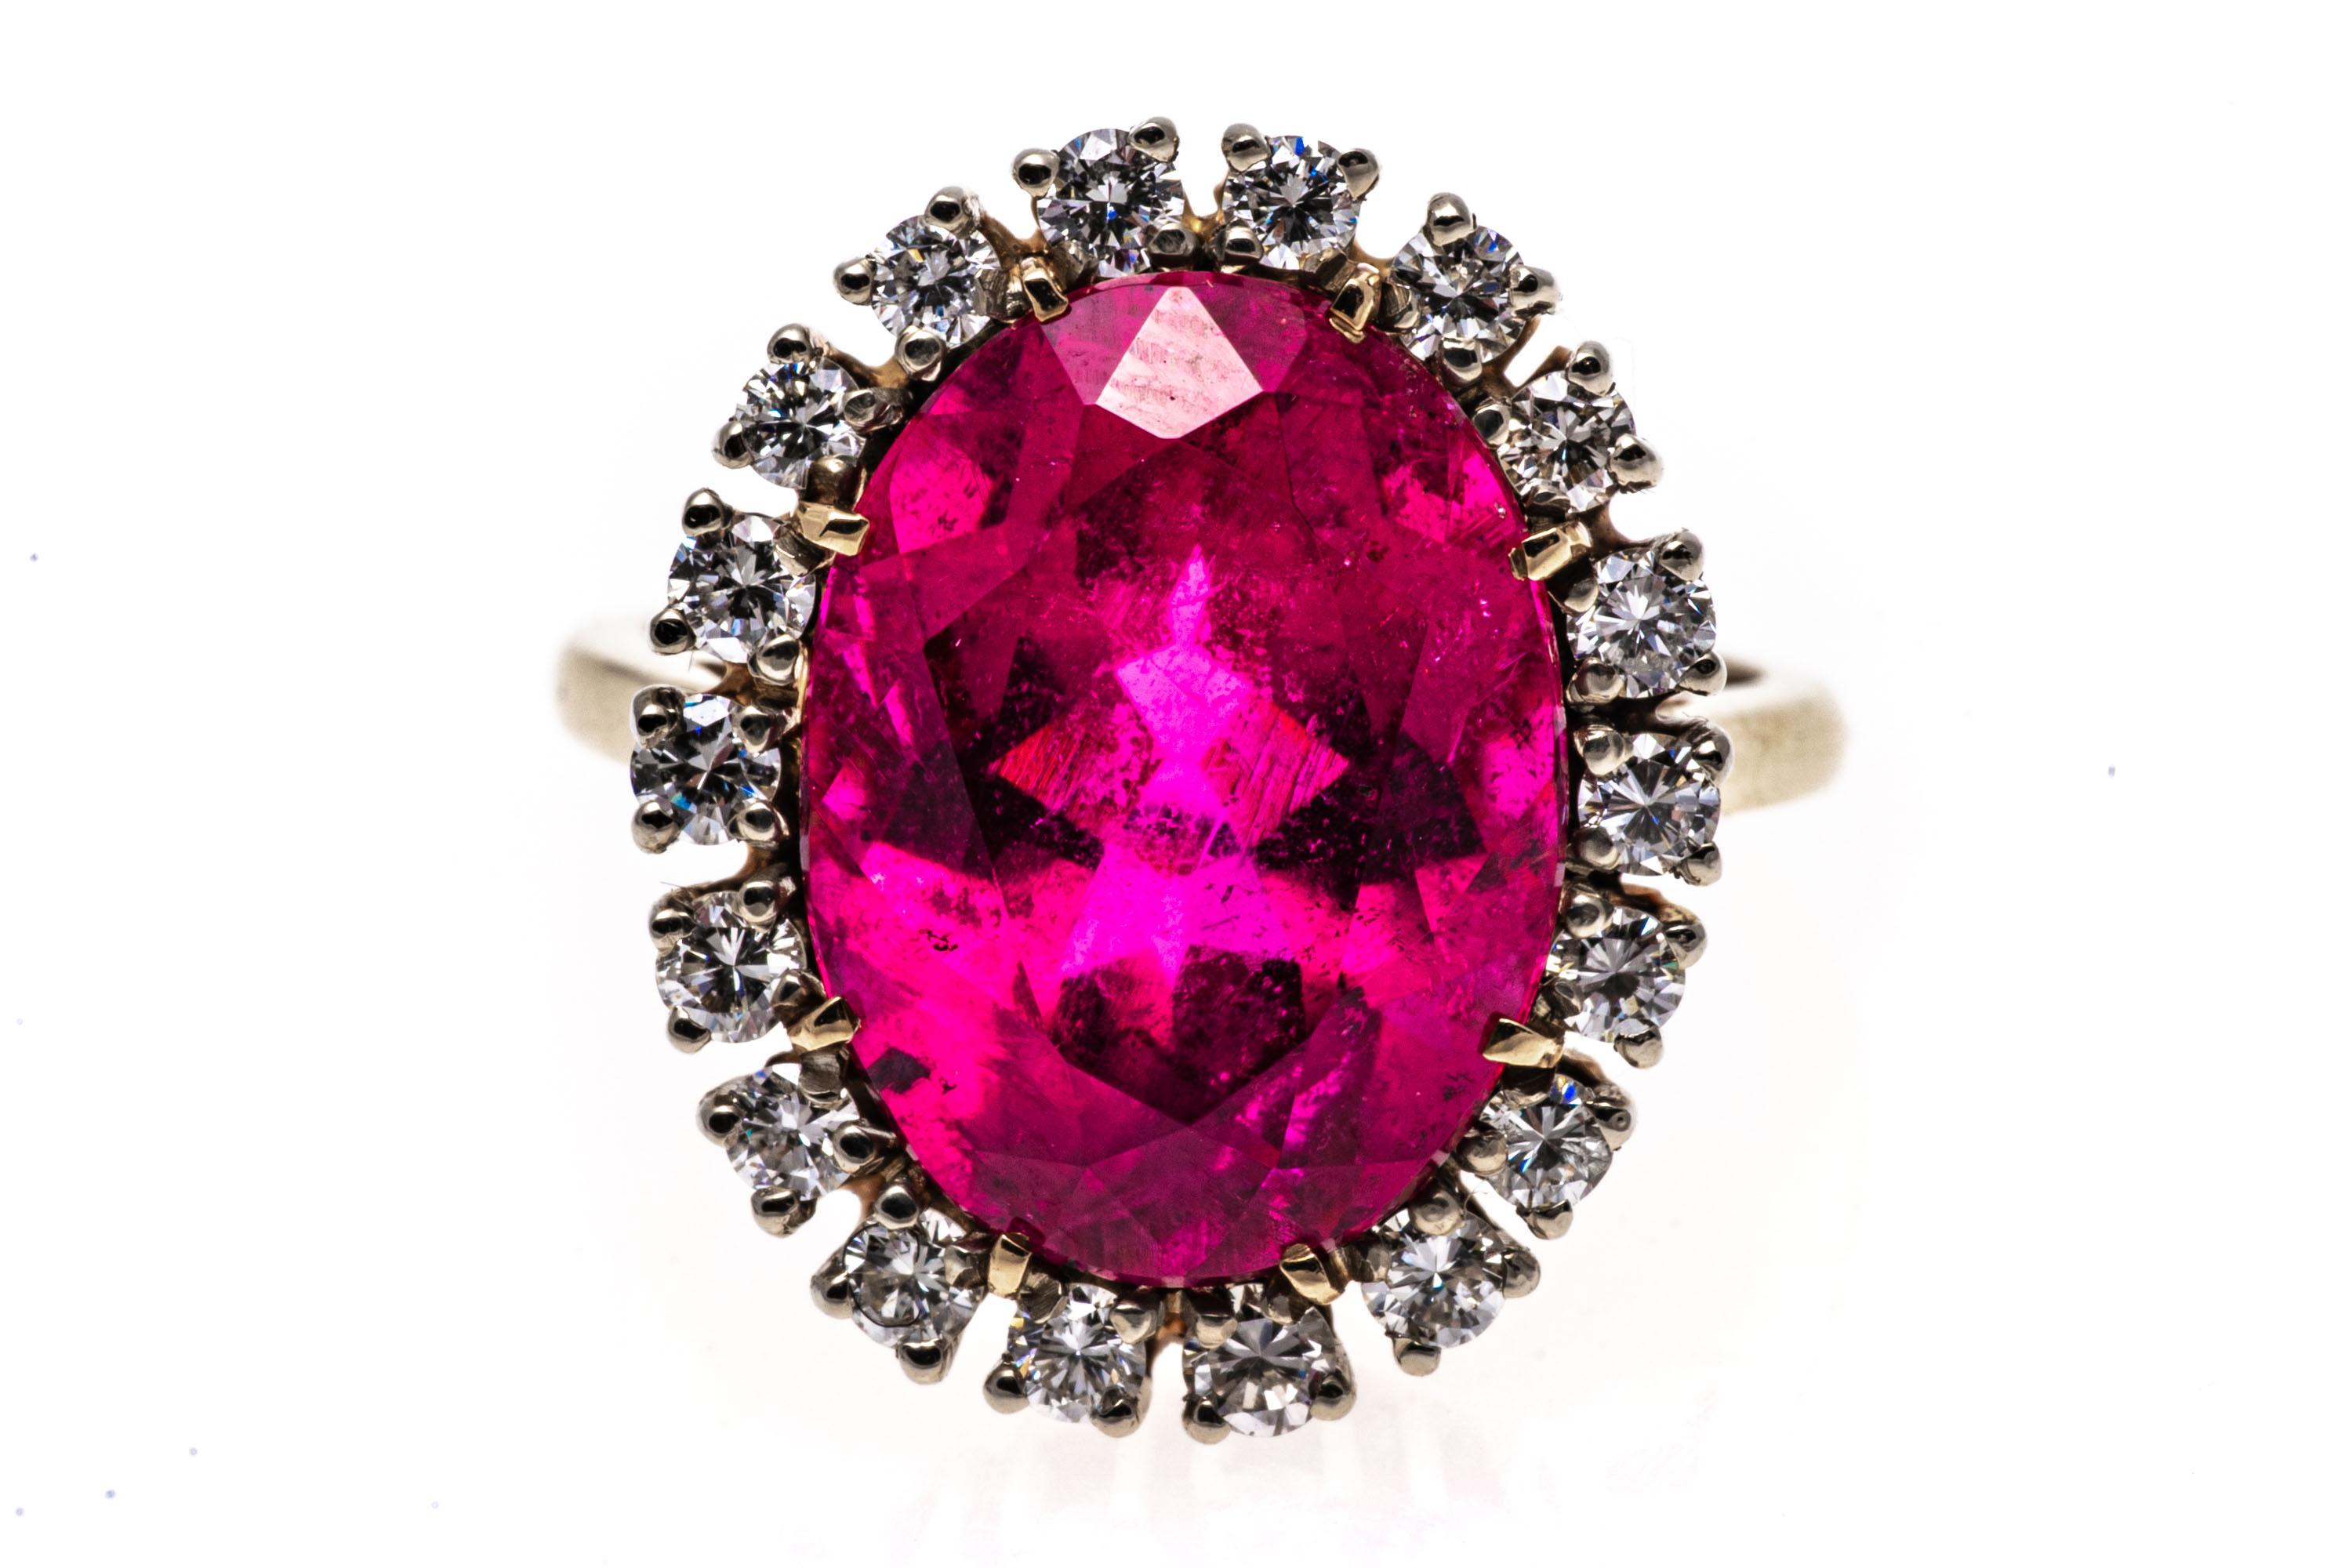 Women's 14k Gold Large Pink Tourmaline (App. 6.62 CTS) and Diamond Halo Ring For Sale